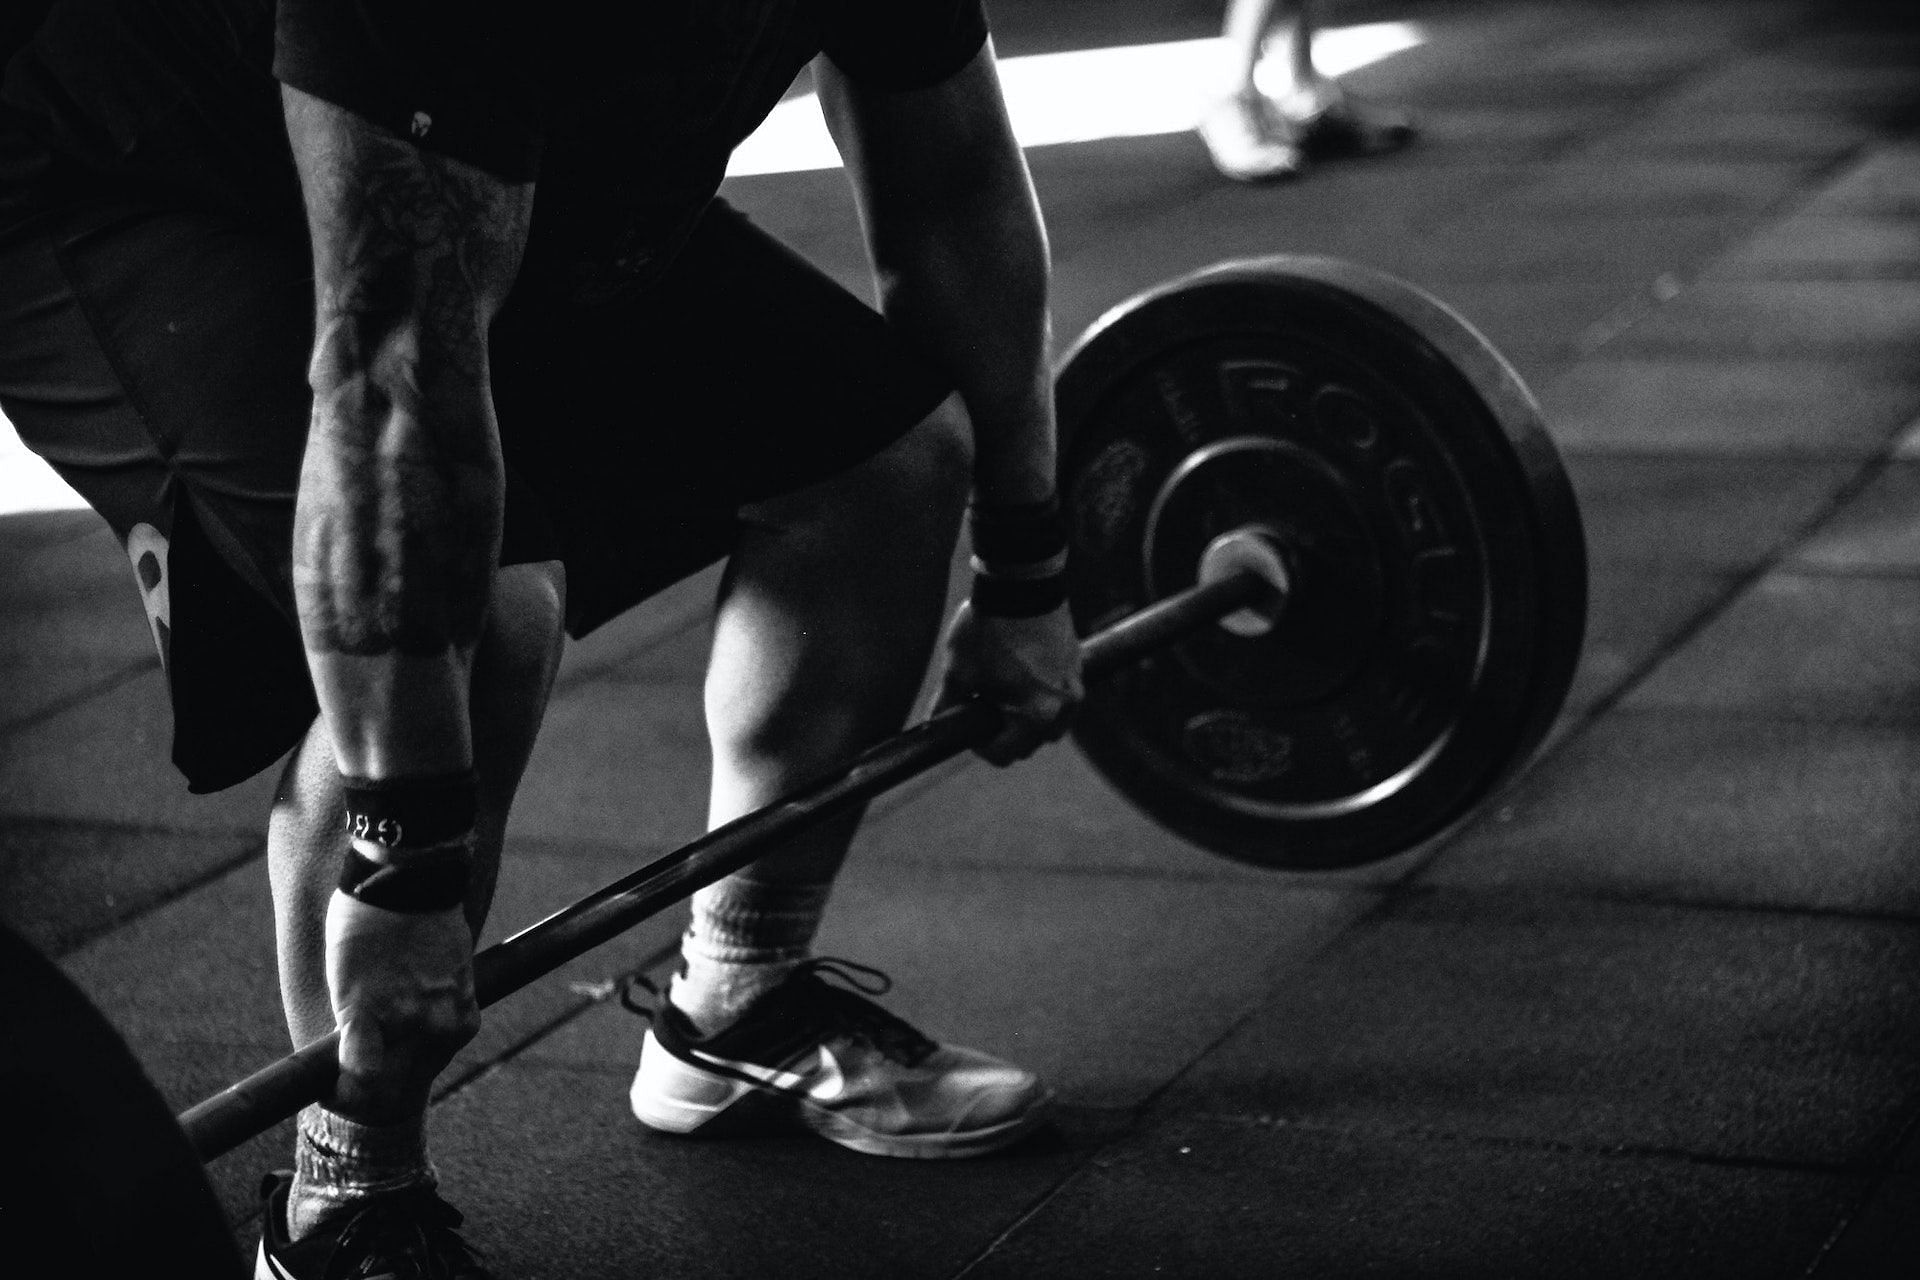 The Romanian deadlift is an incredible lower body strengthening exercise. (Photo via Pexels/Victor Freitas)